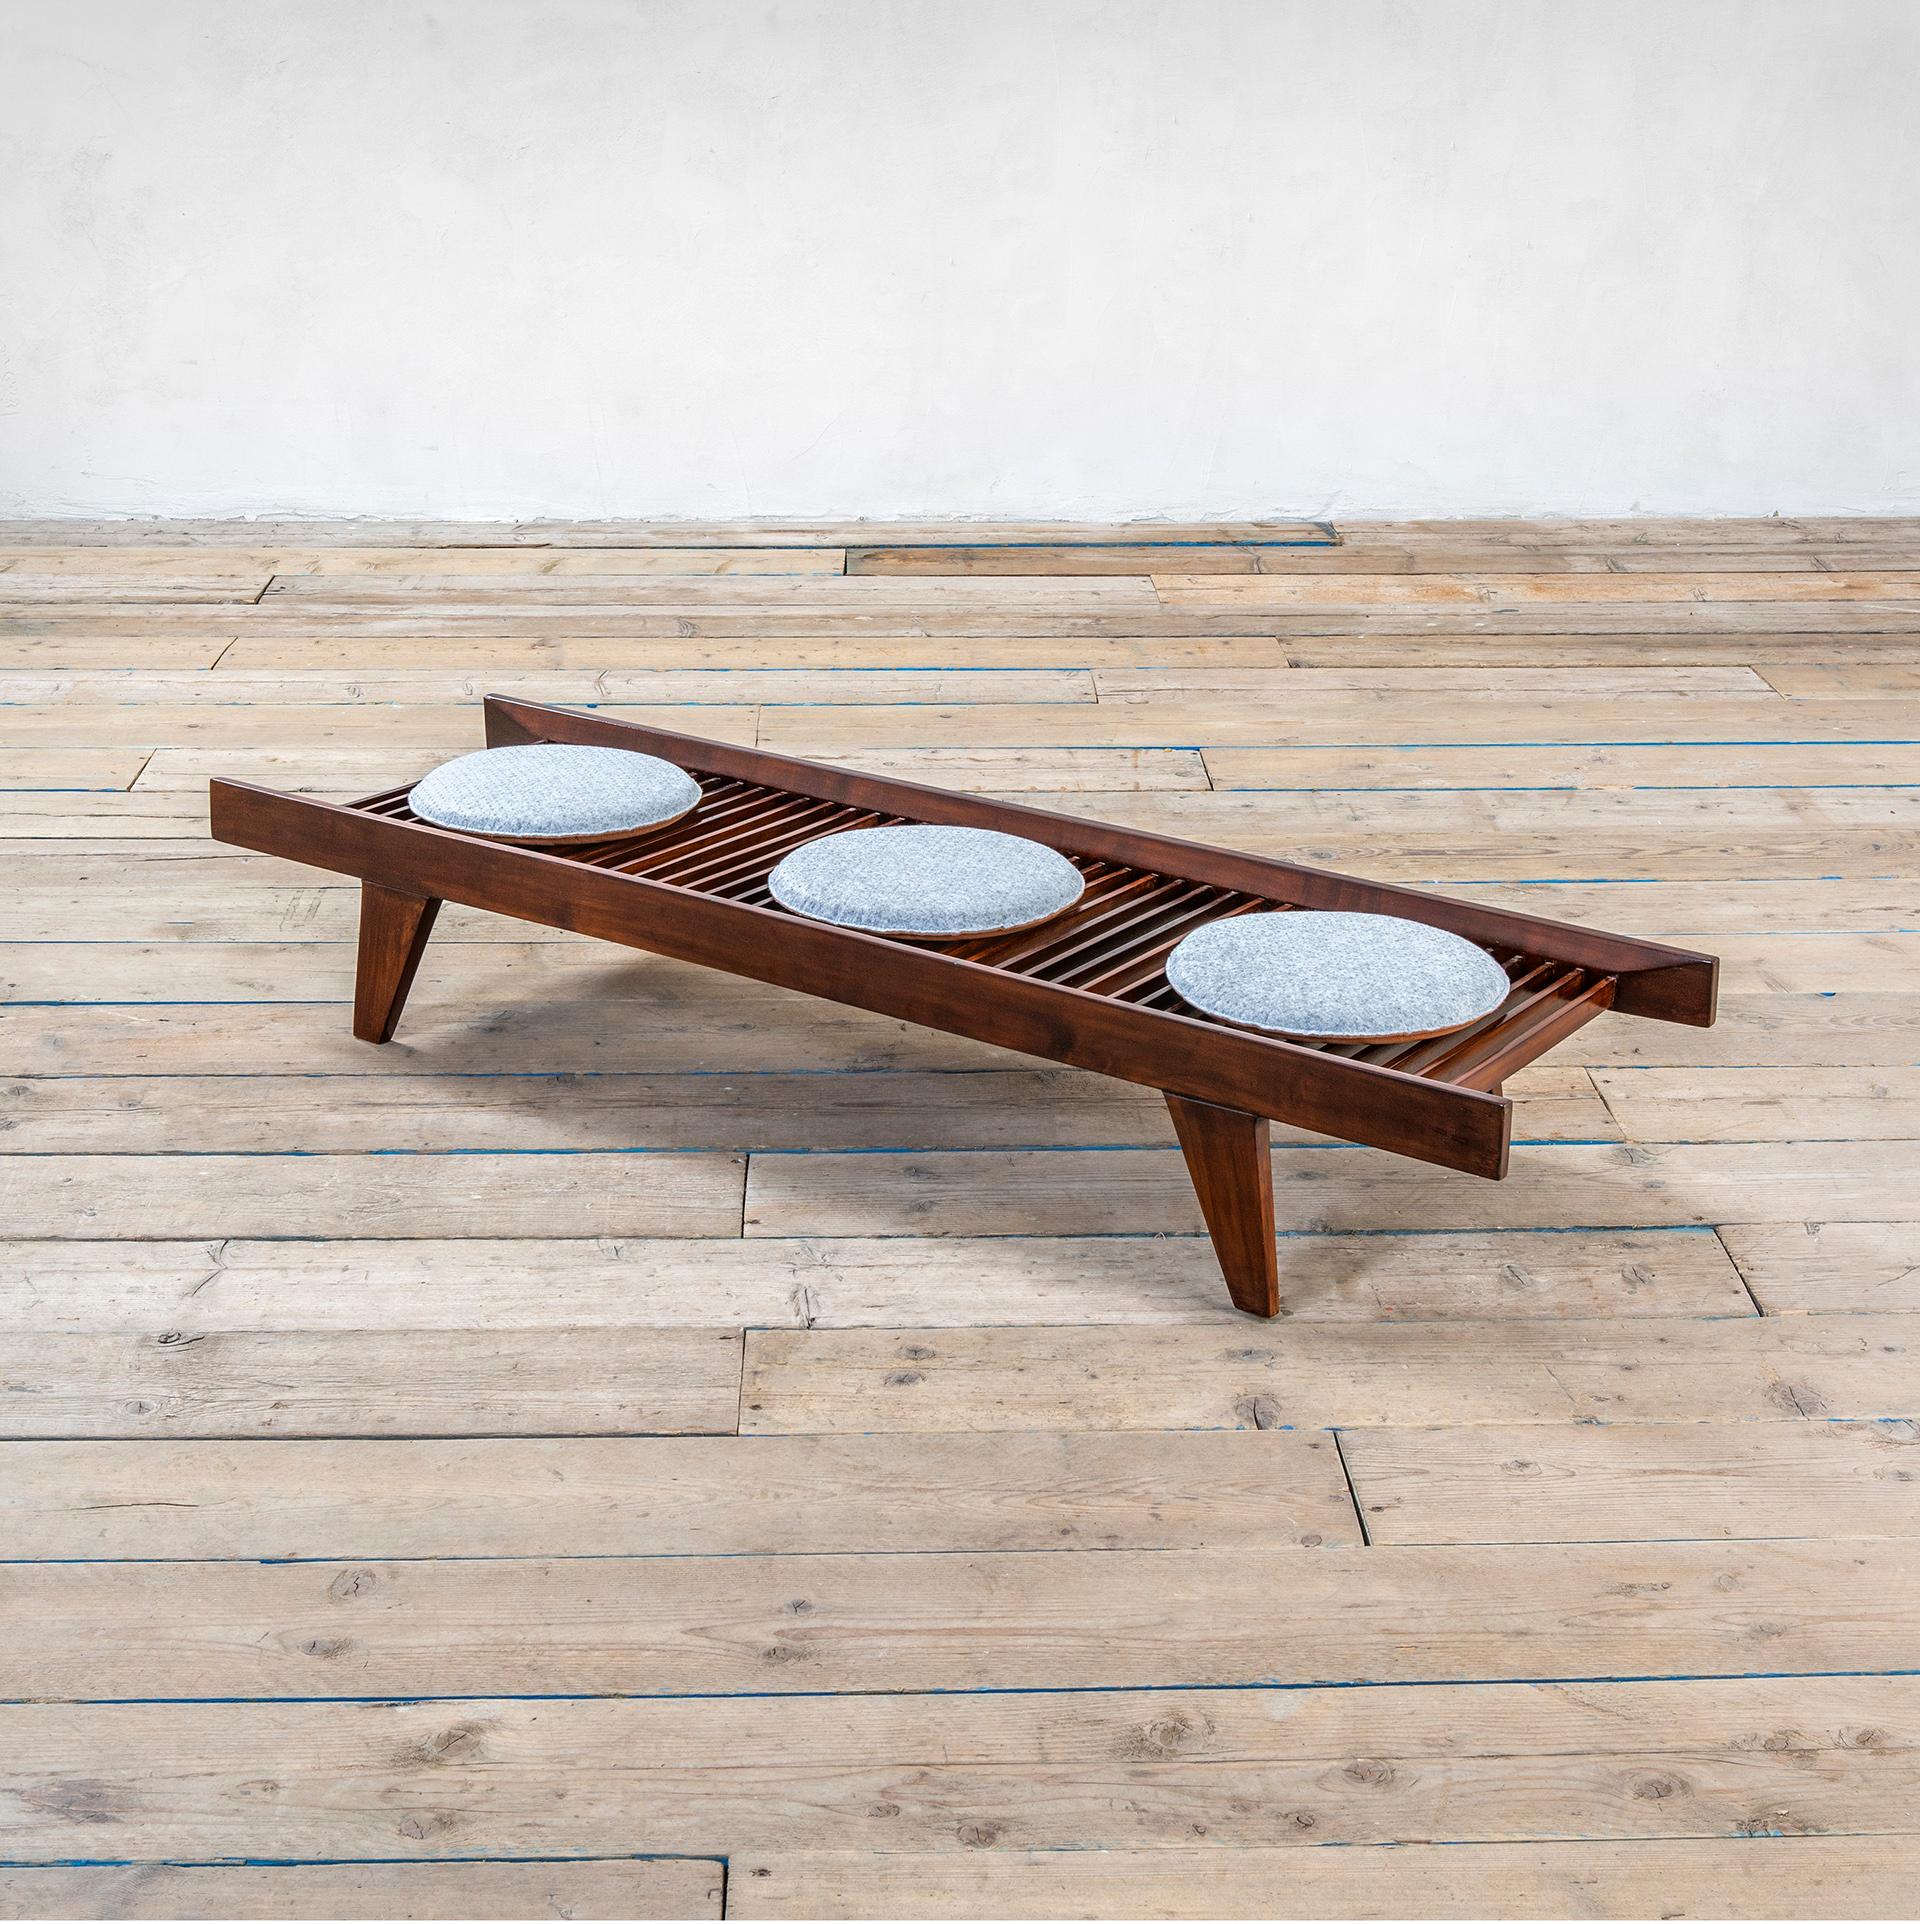 Wooden bench attributed to the italian architect Ignazio Gardella and designed in '50s. The bench derives from an italian apartment deisgned entirely by Ignazio Gardella in Arenzano.
The bench has a strong structure entirely made of wood, the